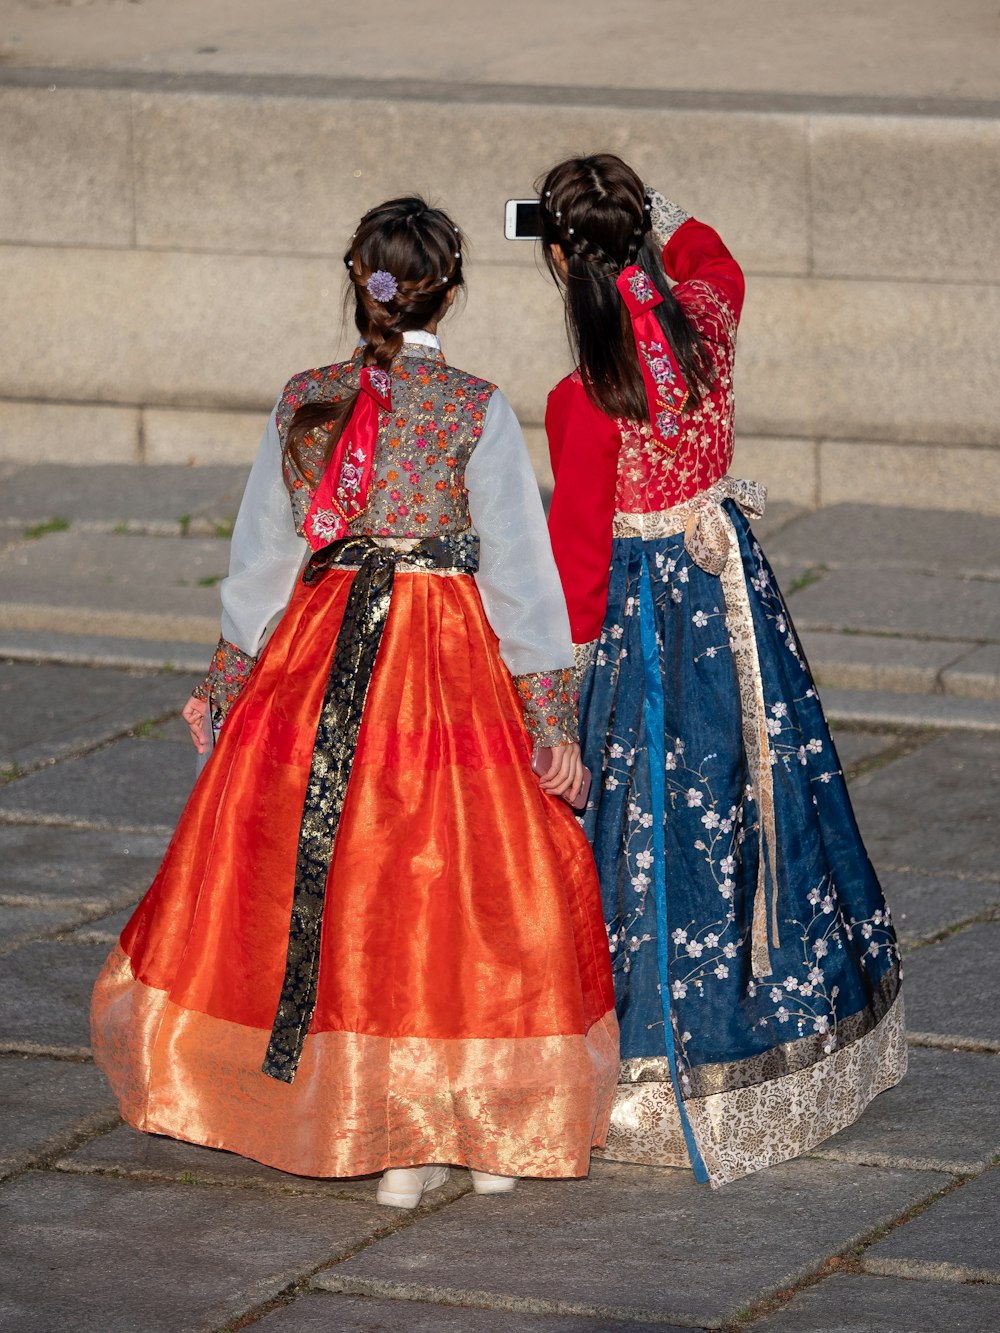 two young girls dressed in colorful dresses standing next to each other